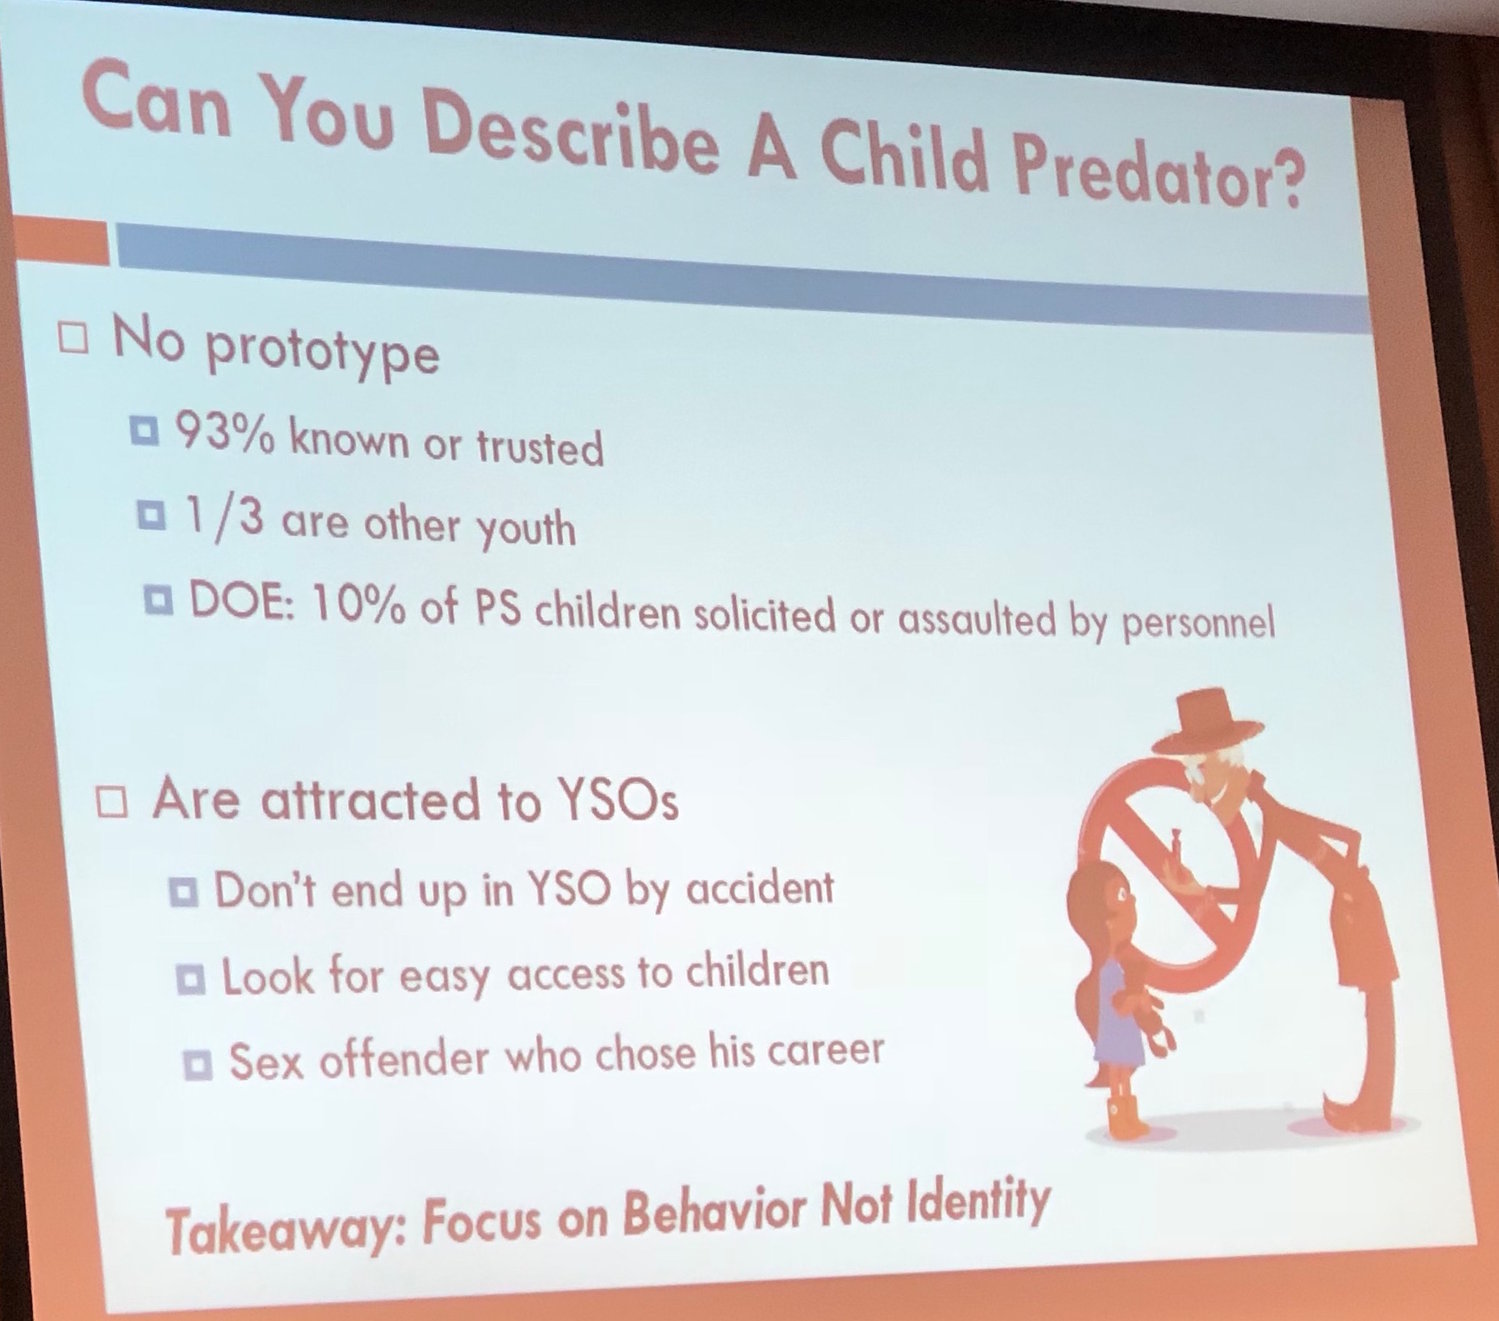 Child predators are not easy to identify and tend to work or volunteer at schools and youth-services organization.